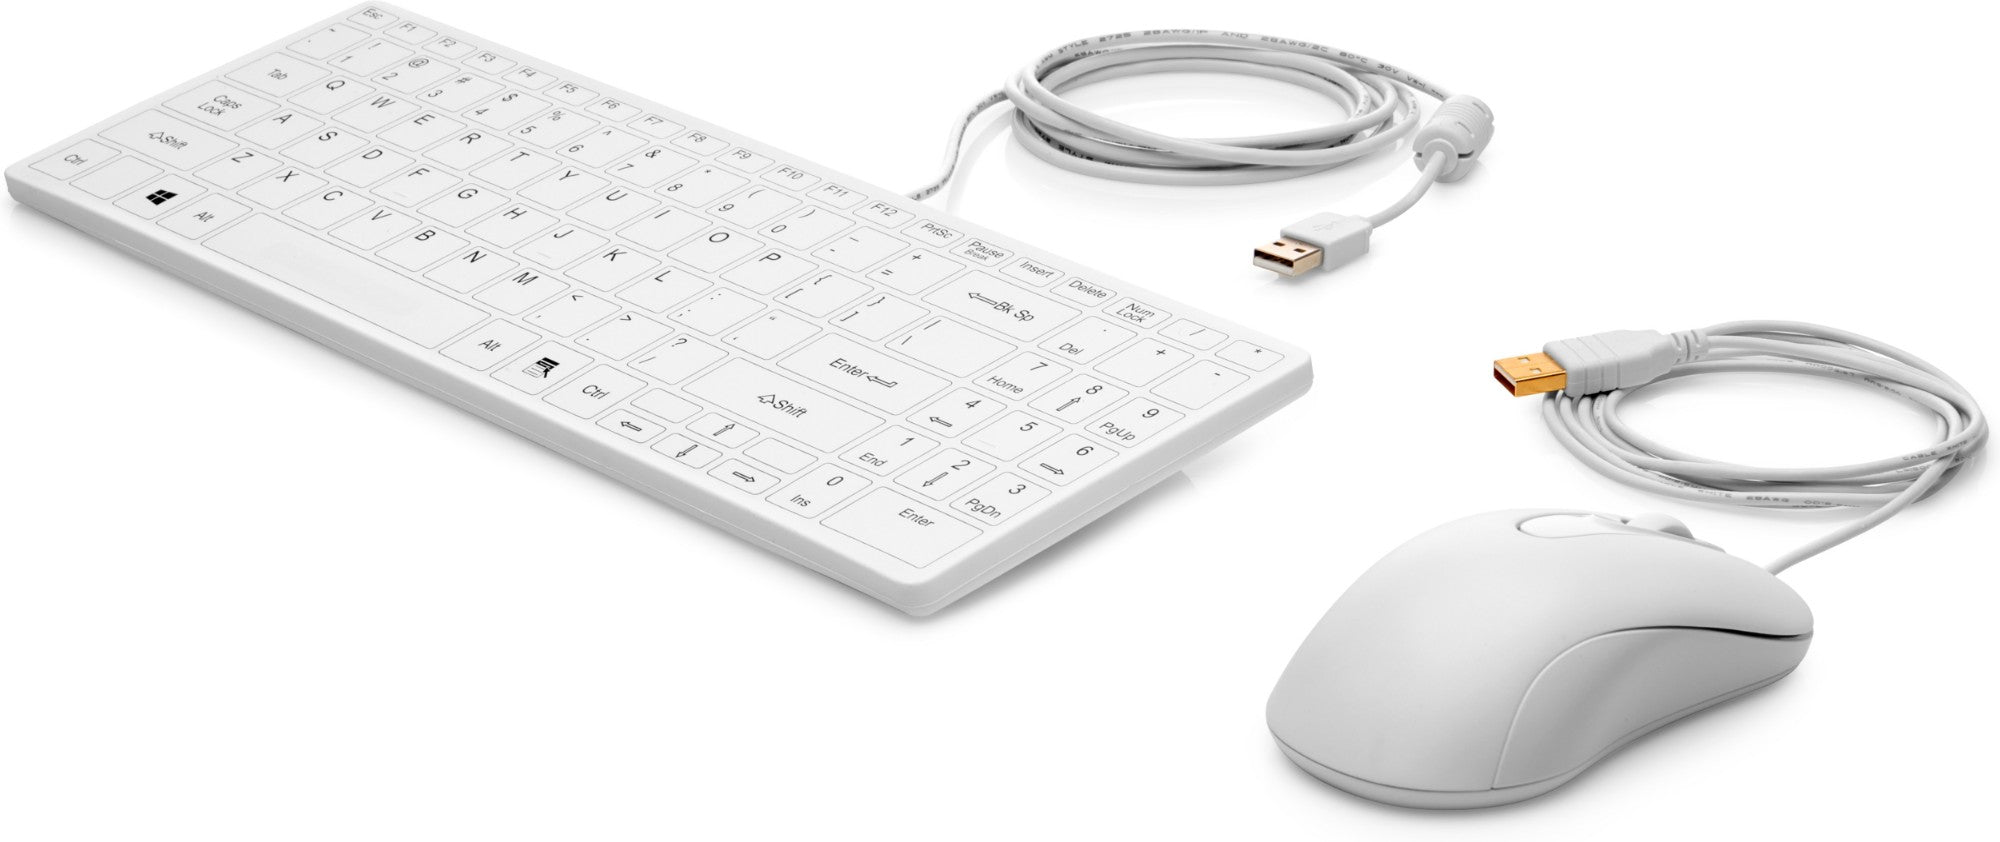 USB Keyboard and Mouse Healthcare Edition